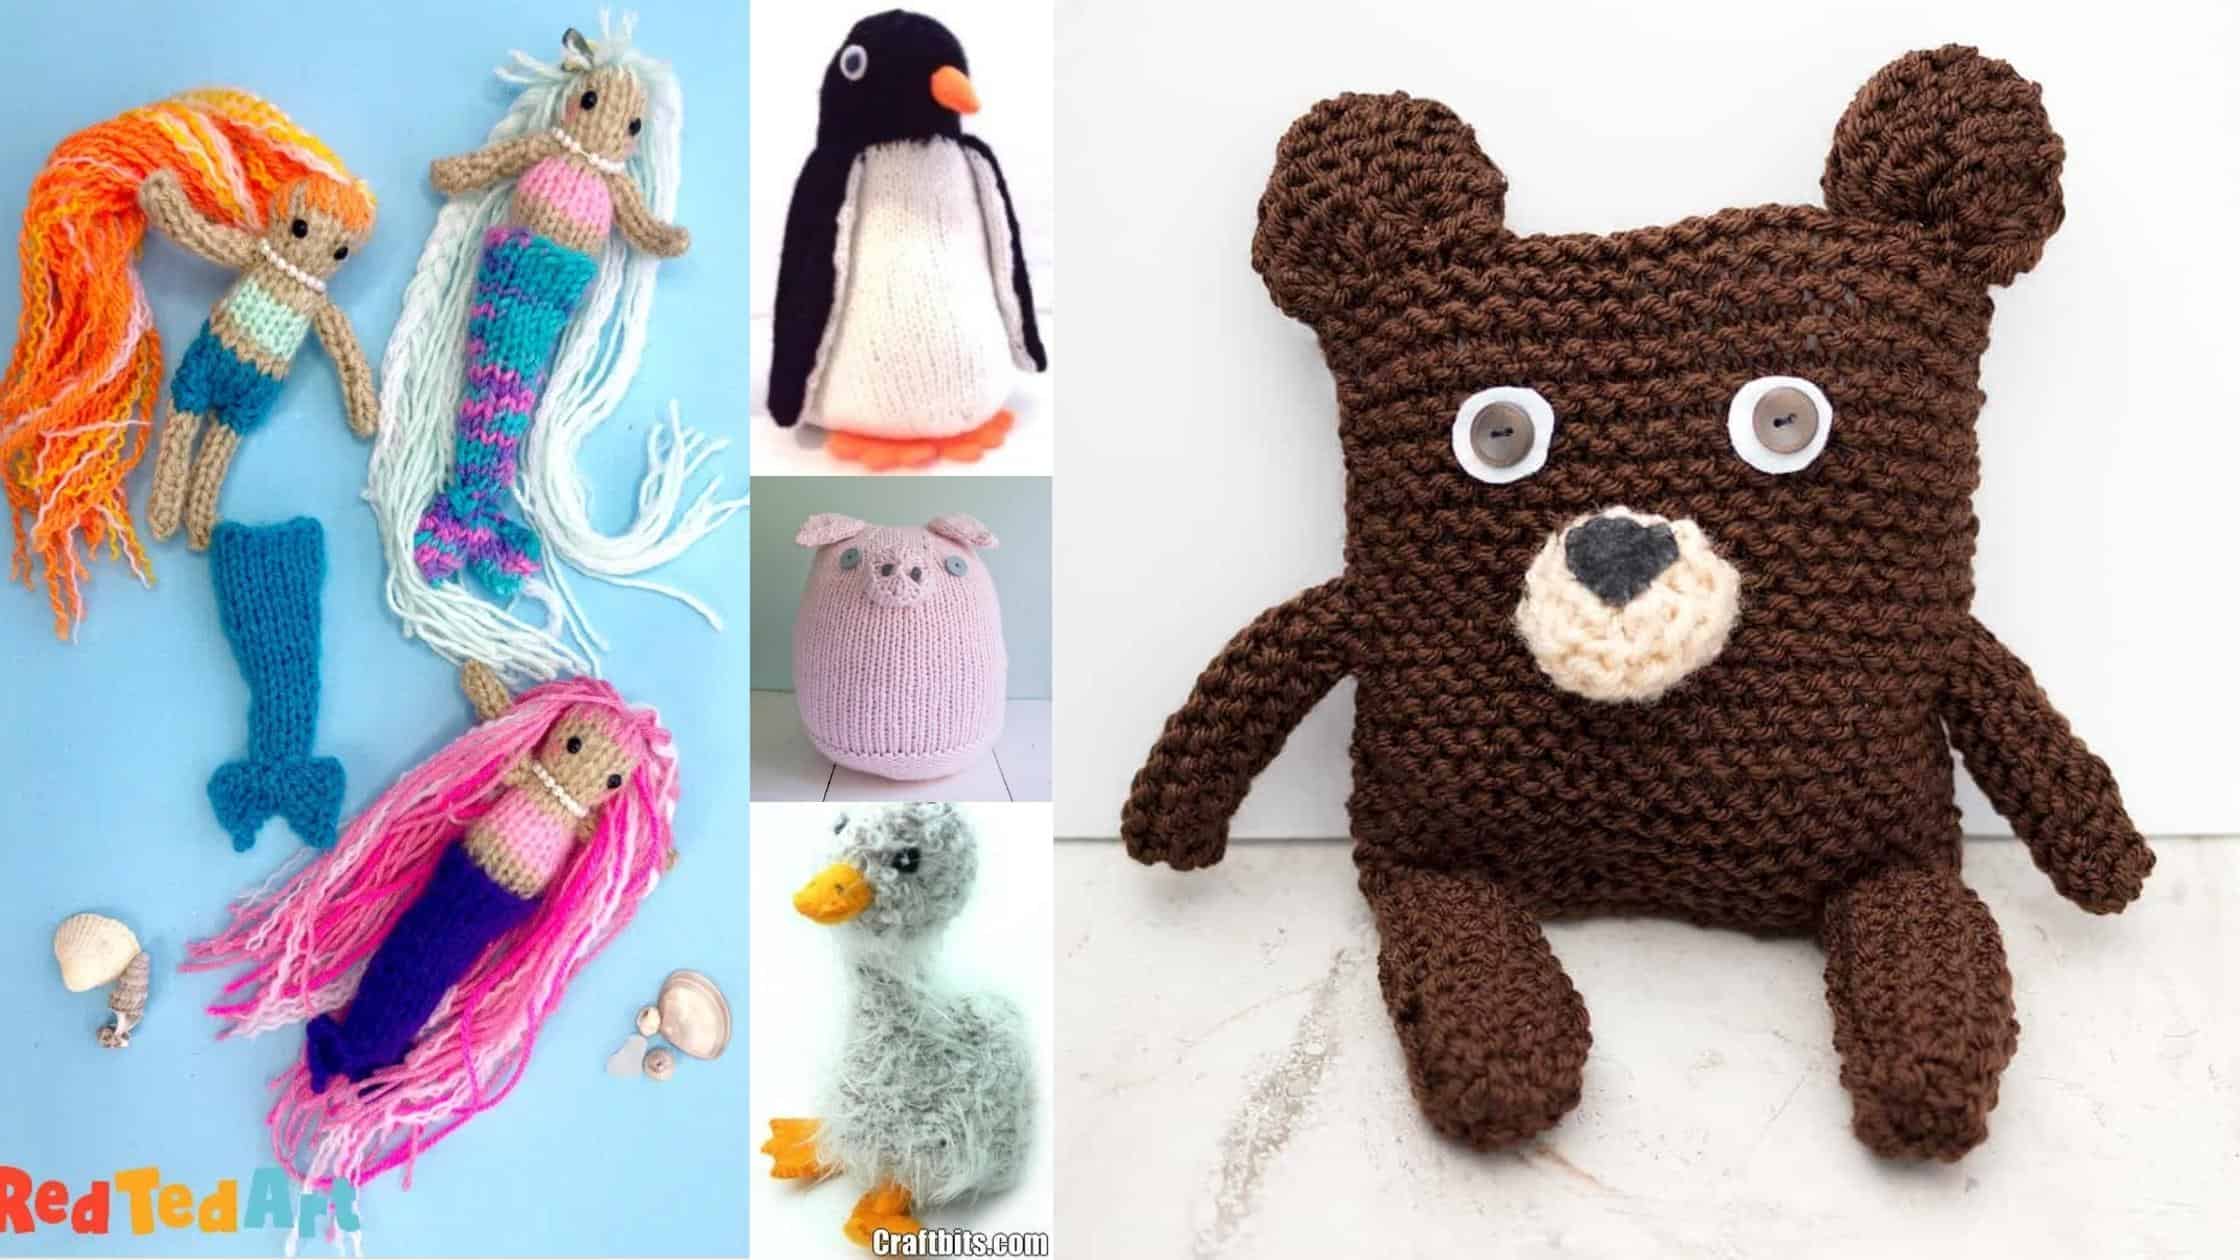 10 Brilliant Free Toy Knitting Patterns - DIY Thought